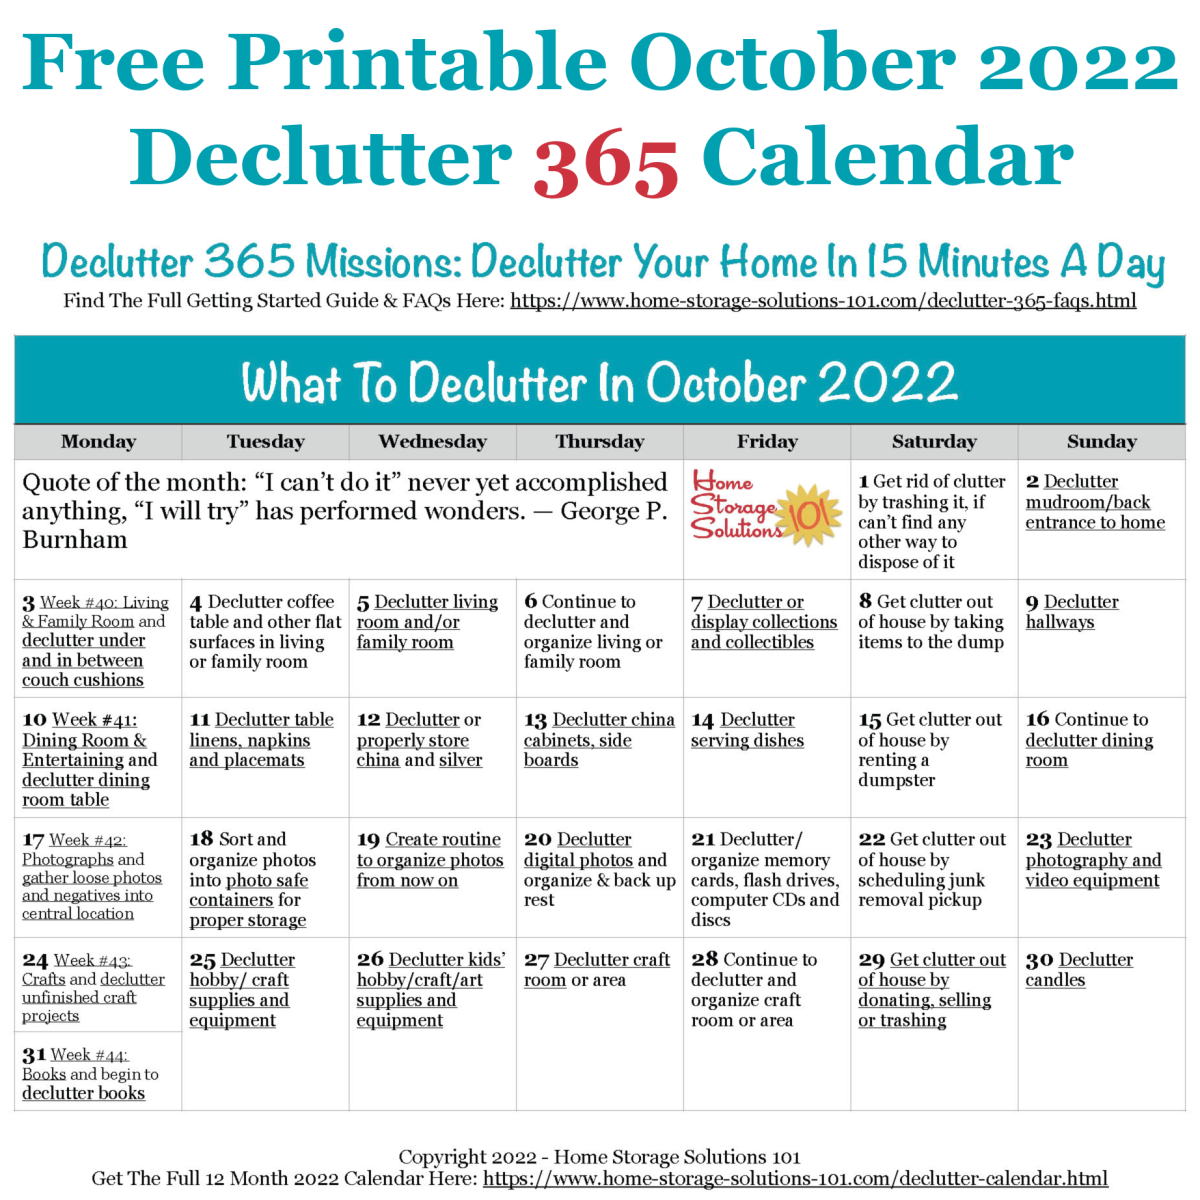 Free printable October 2022 #decluttering calendar with daily 15 minute missions. Follow the entire #Declutter365 plan provided by Home Storage Solutions 101 to #declutter your whole house in a year.